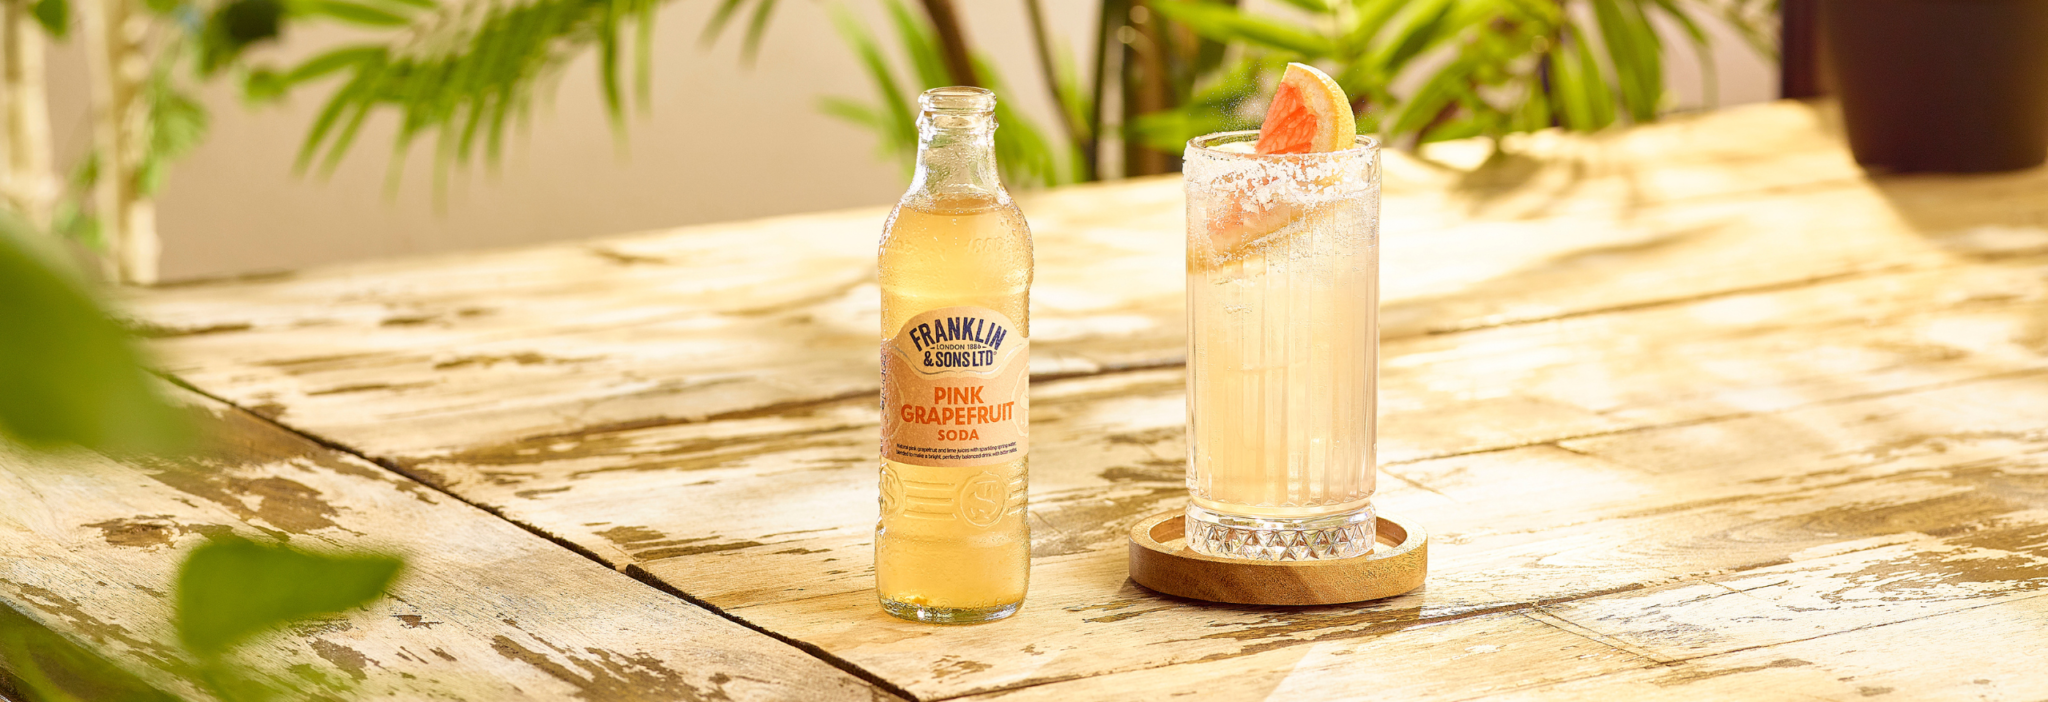 Cazcabel Paloma cocktail made with Franklin & Sons Pink Grapefruit Soda | Franklin & Sons